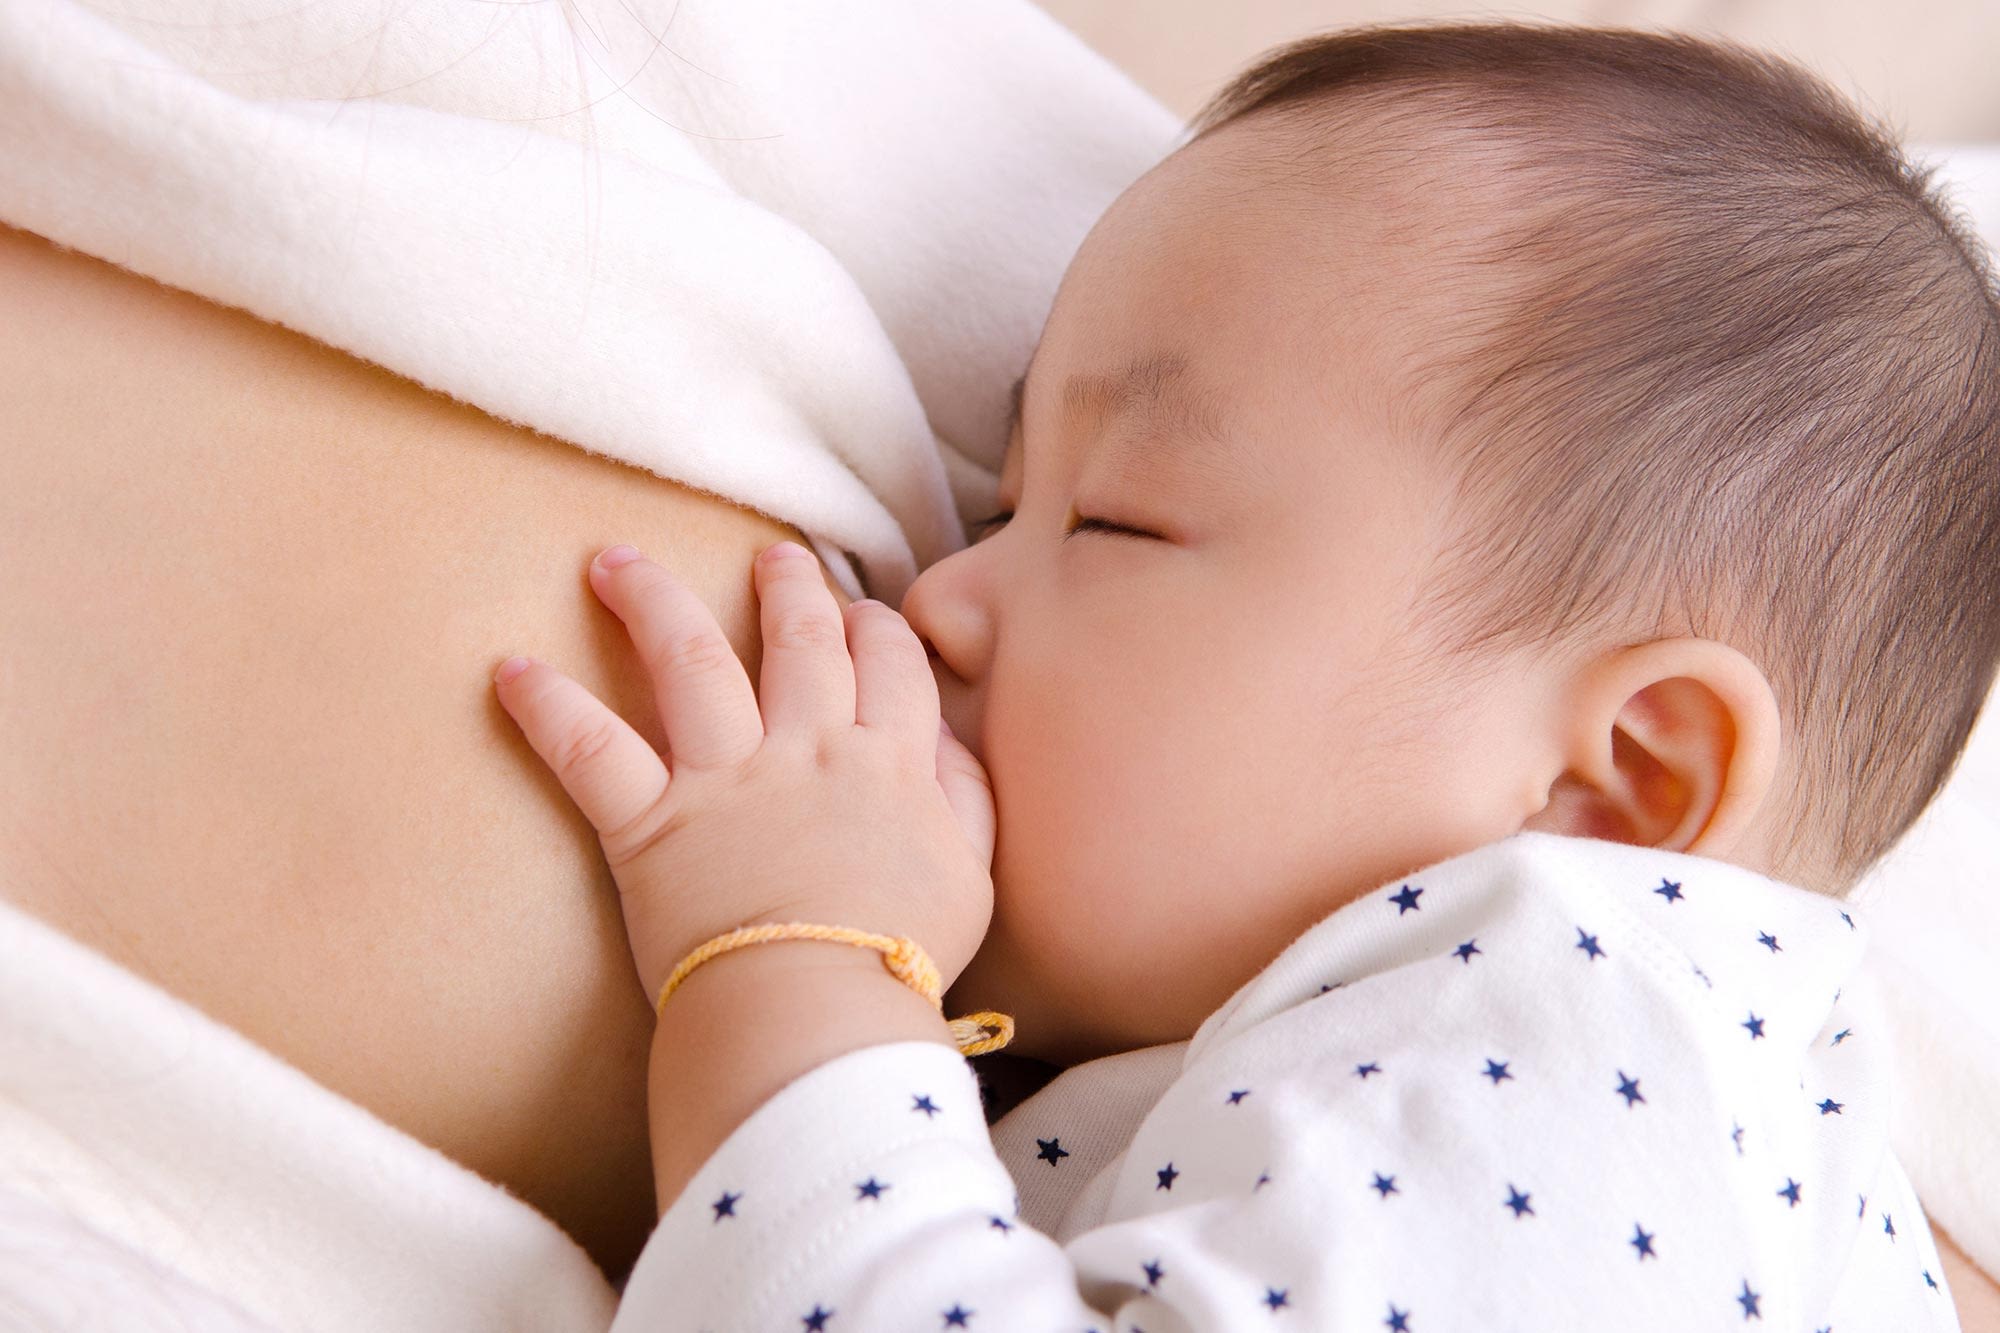 Study Finds THC in Breastmilk: Here’s What Every Cannabis-Using Mother Should Know